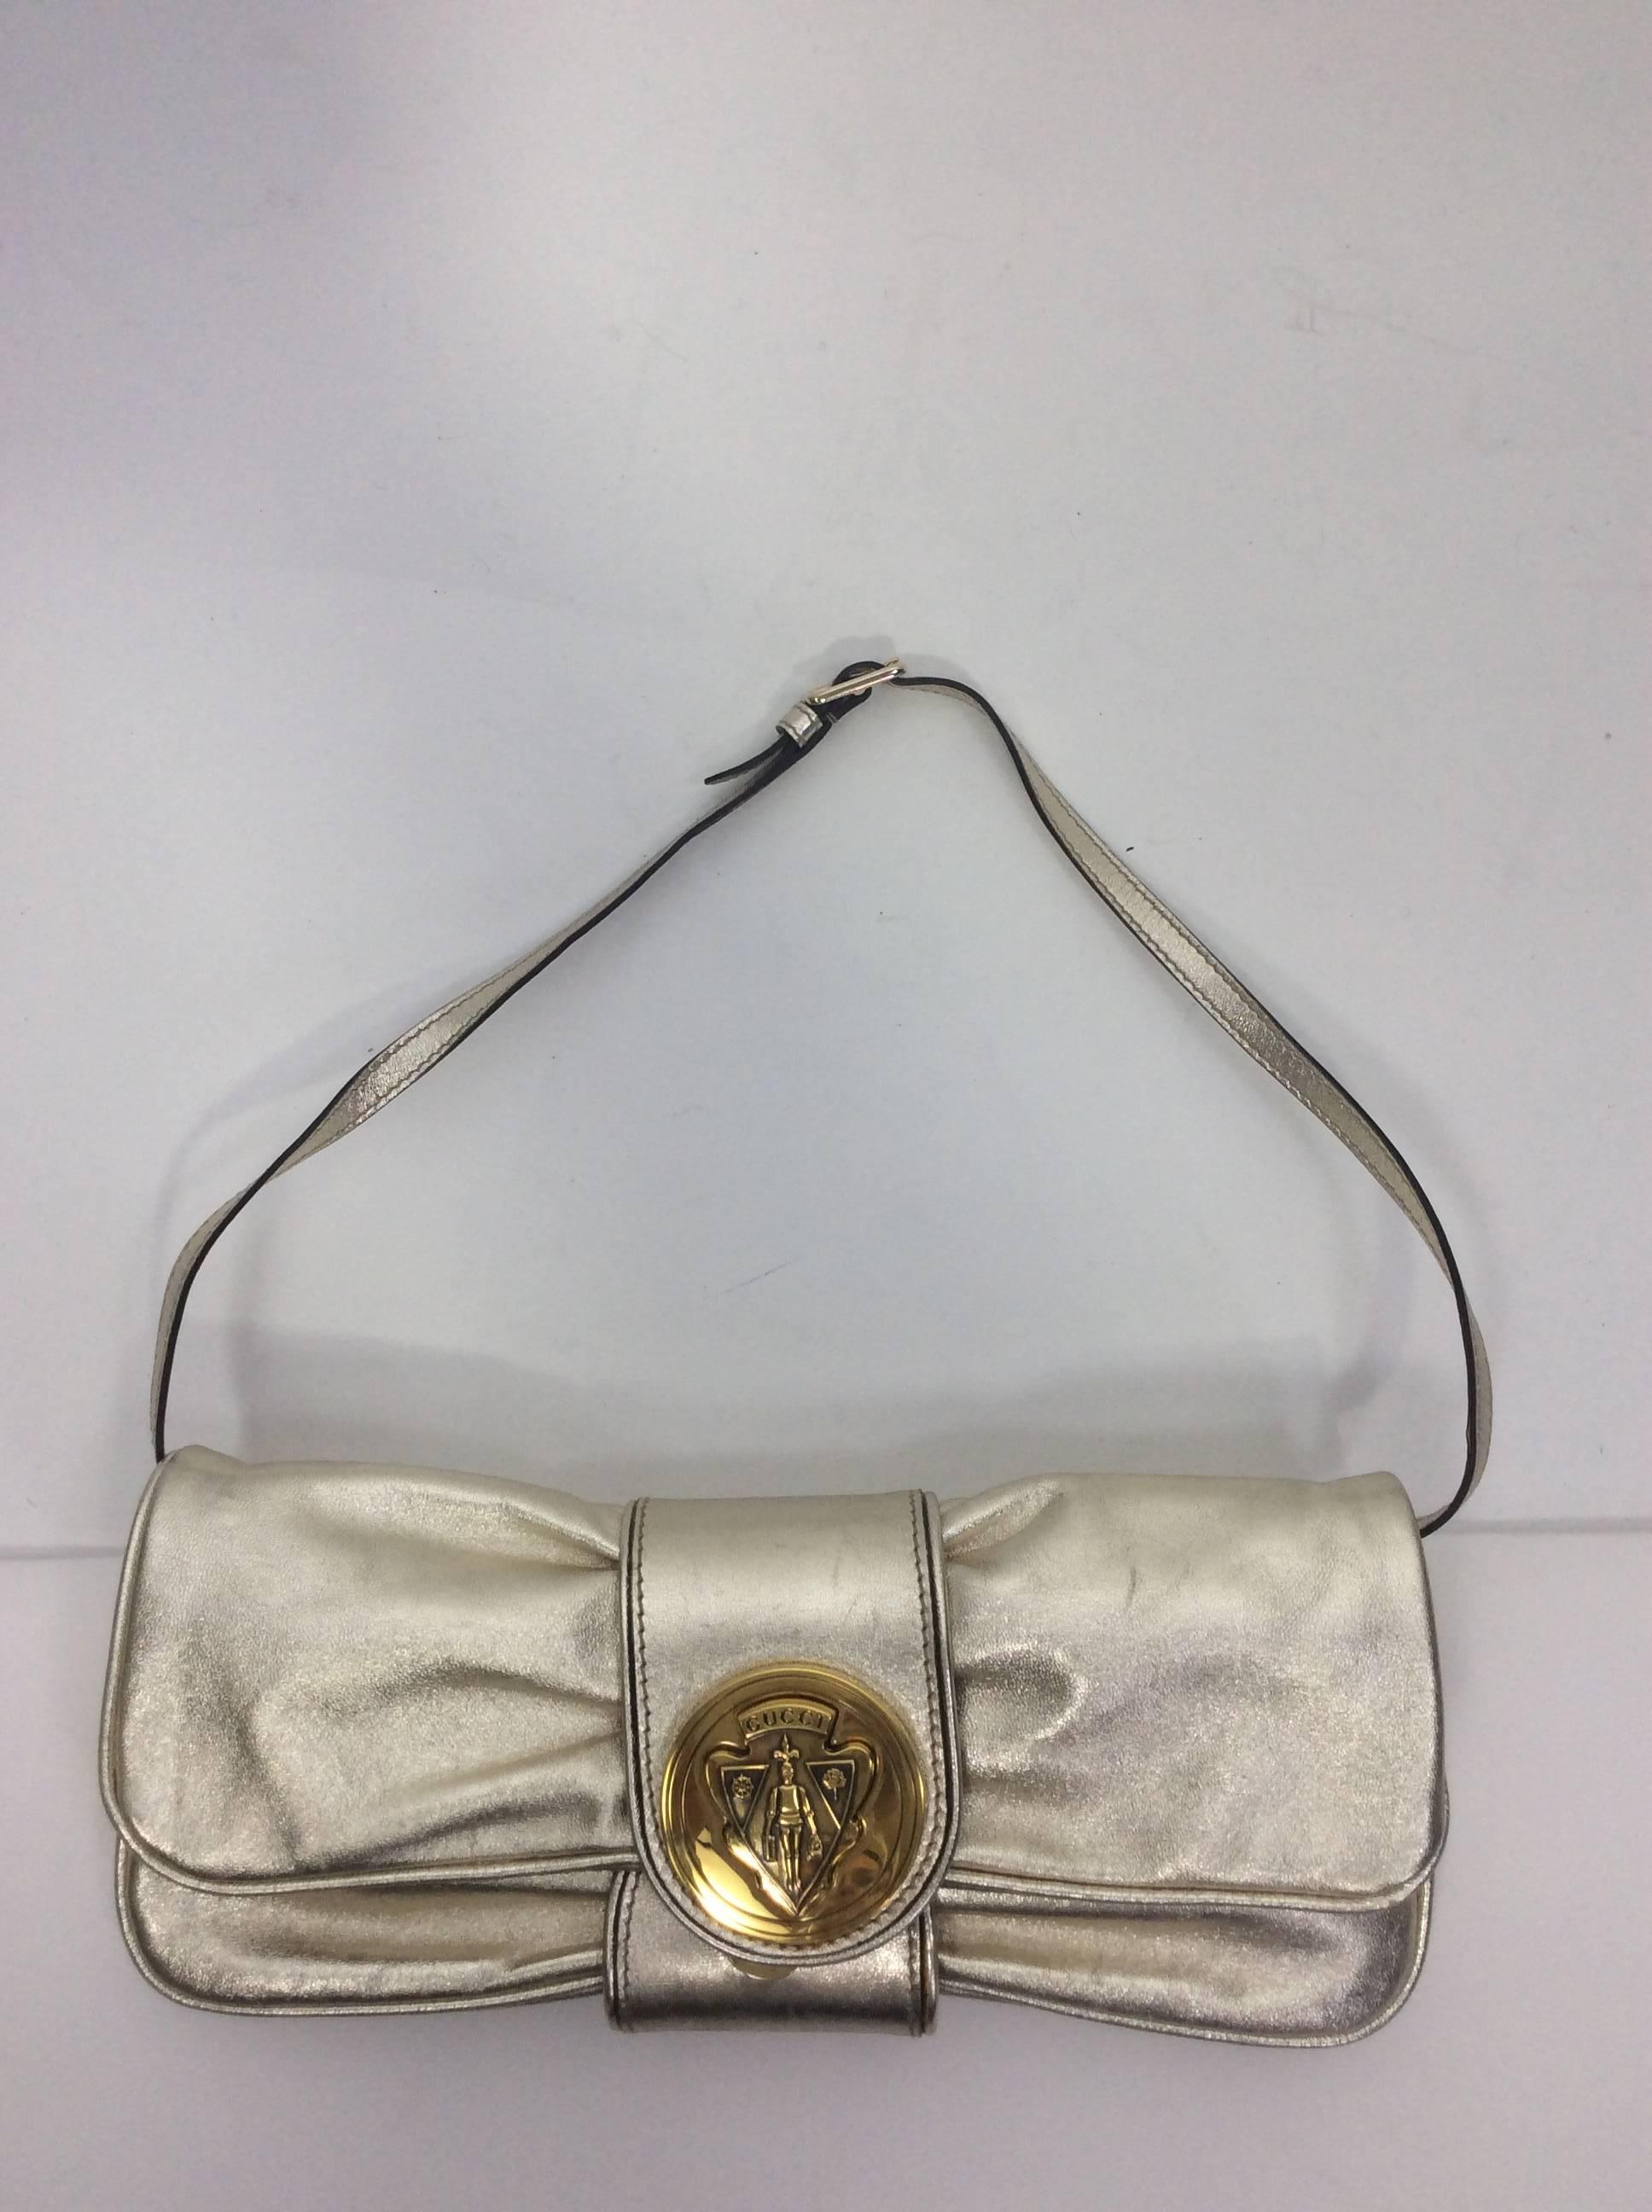 Gucci Metallic Small Gold Clutch  In Excellent Condition For Sale In Narberth, PA